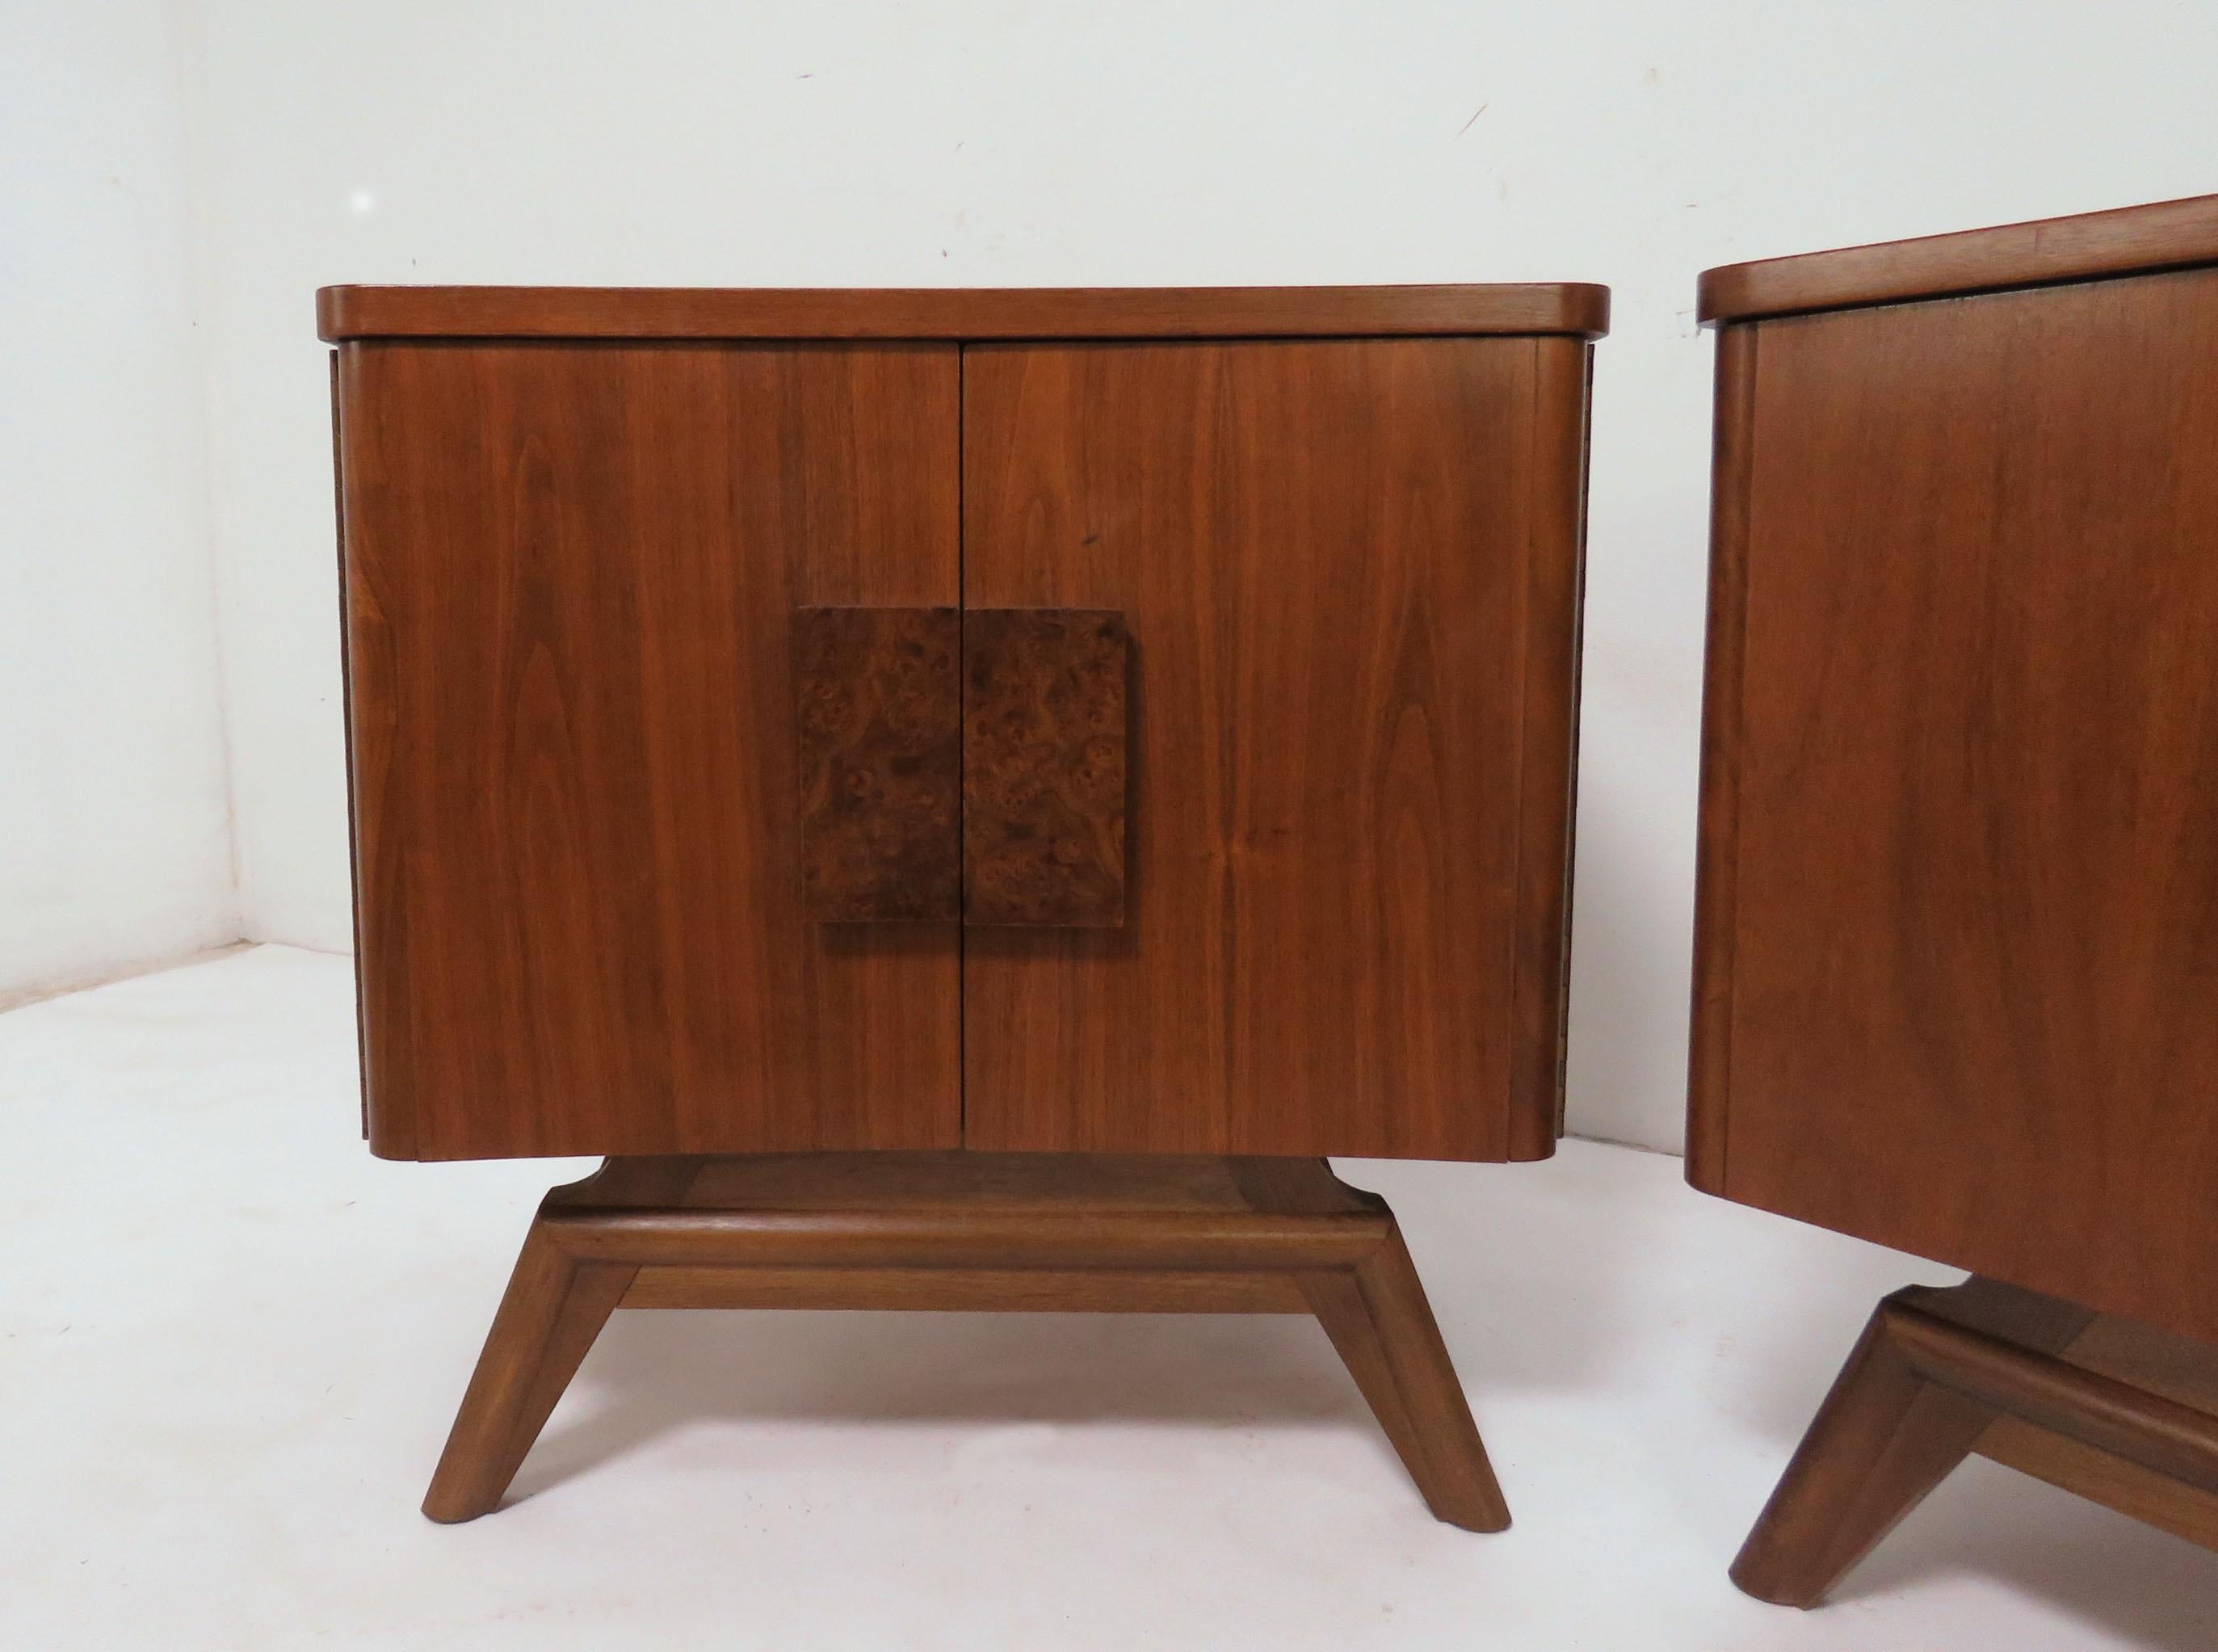 Pair of American Mid-Century Modern nightstands in walnut with contrasting burl wood handles, circa 1960s.